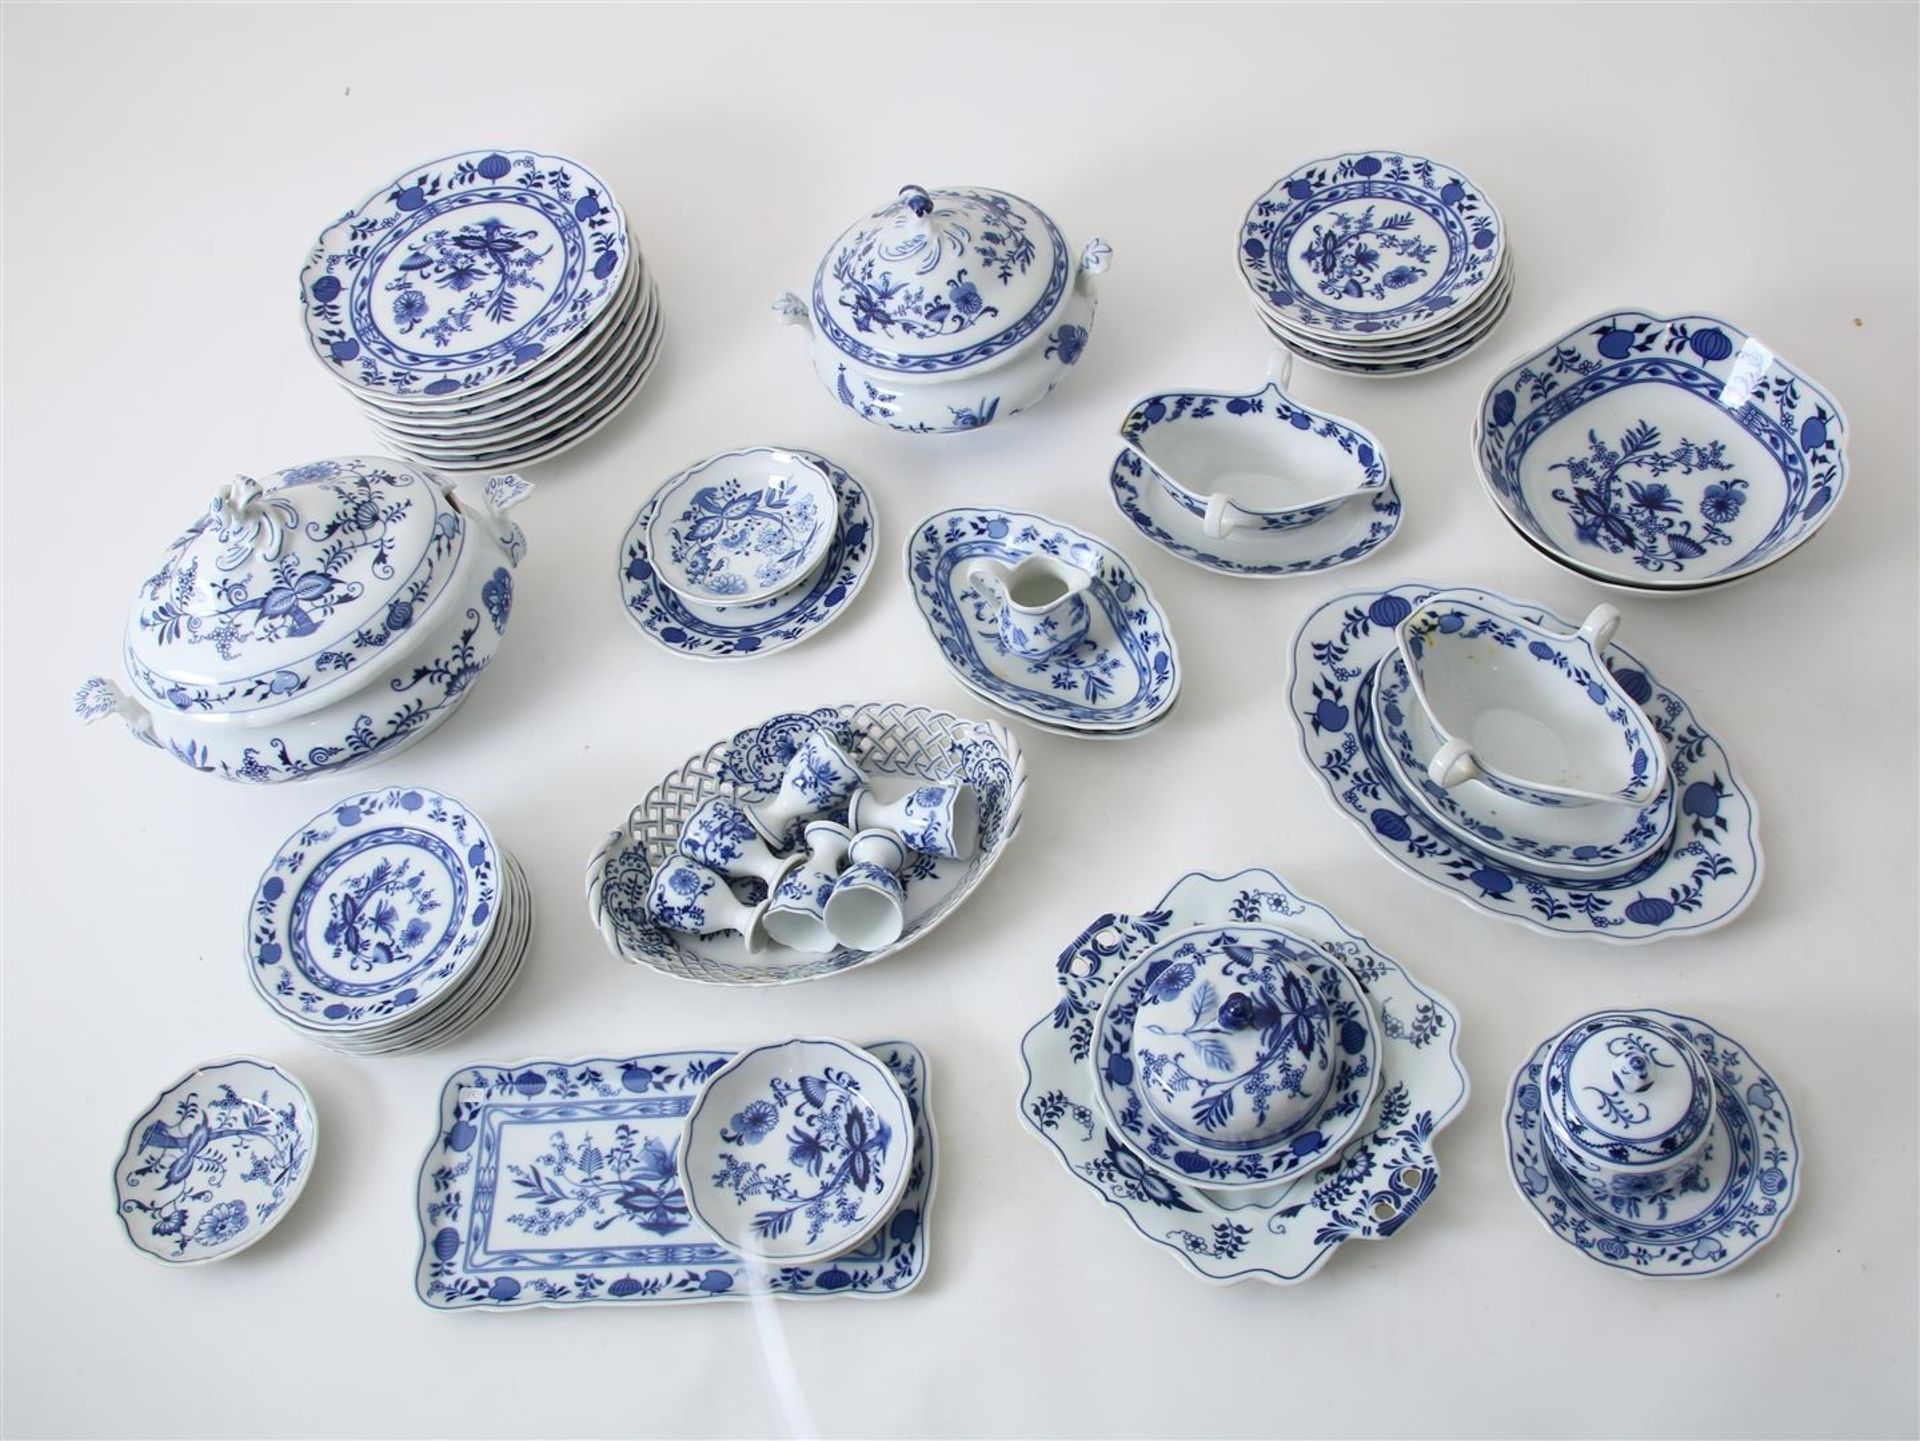 Approximately 50 pieces of porcelain tableware with zwiebelmuster decor, including bowls,